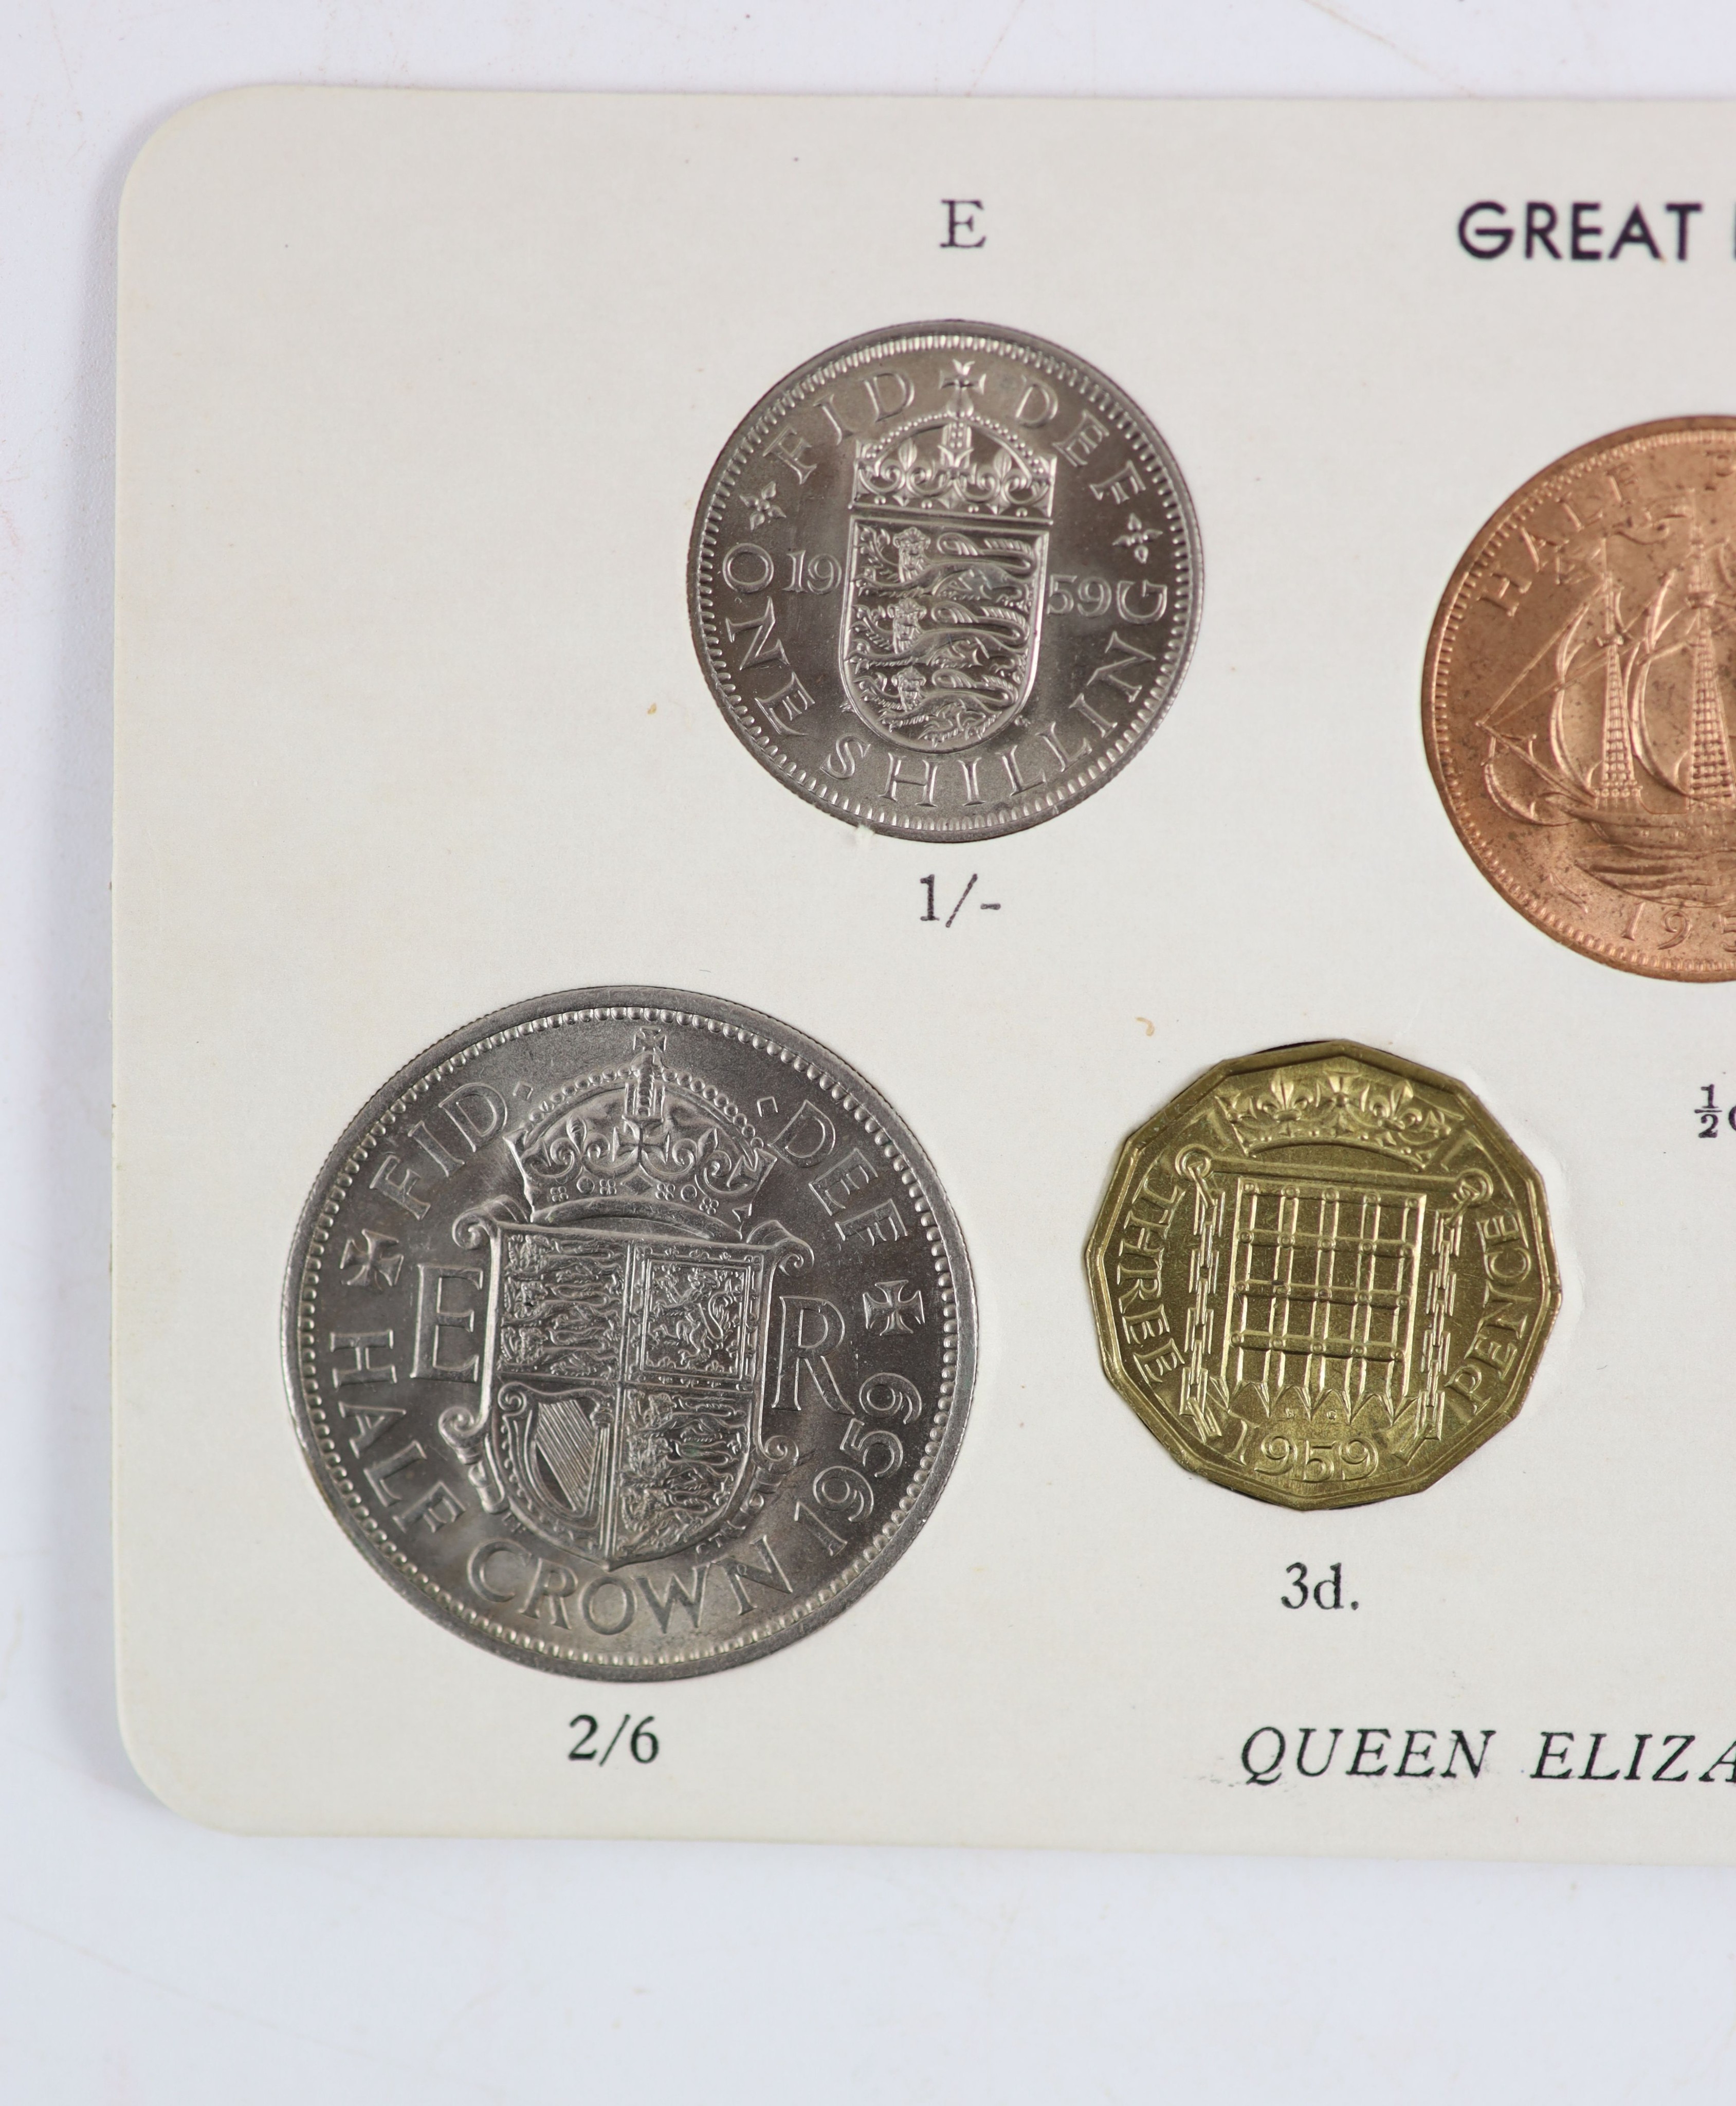 Queen Elizabeth II pre-decimal specimen coin sets for 1953 - 1967, first and second issues, all EF/UNC (15 sets), including 1954, 1957-1959 halfcrowns, florins and shillings, scarce in high grade